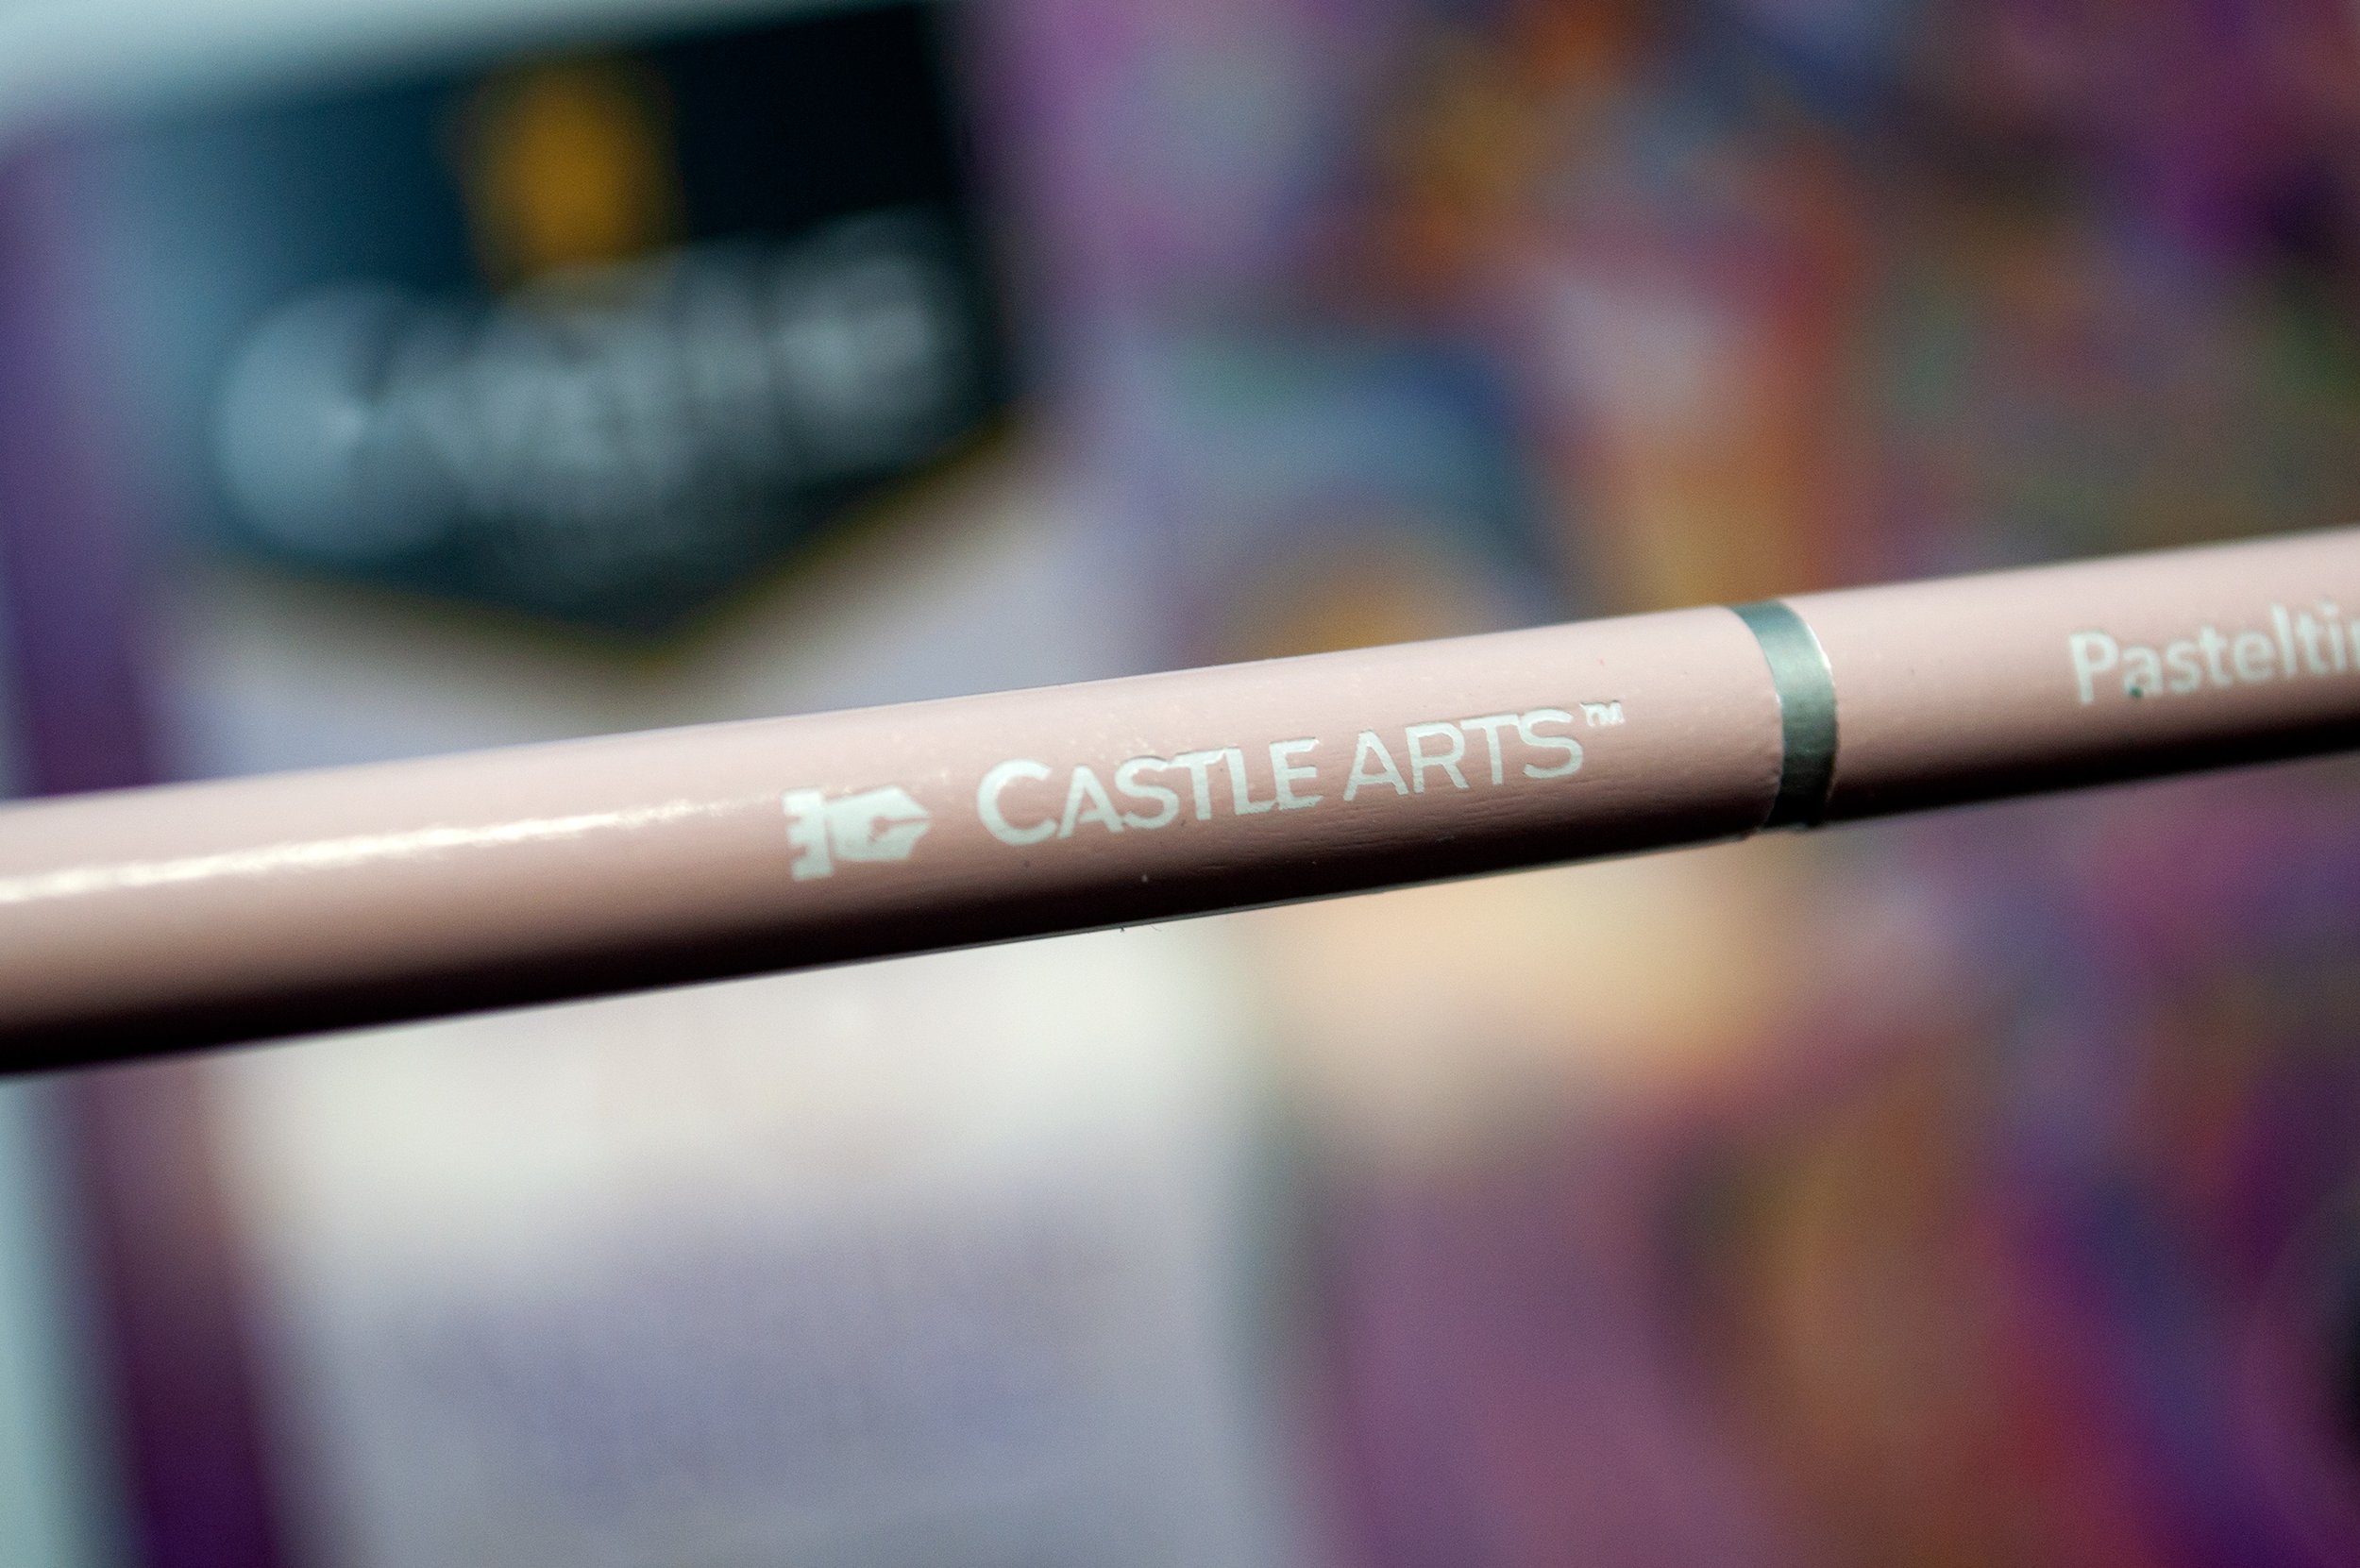 Castle Art Supplies Gold Standard 72 Coloring Pencils Set with Extras |  Quality Oil-based Colored Cores Stay Sharper, Tougher Against Breakage |  For